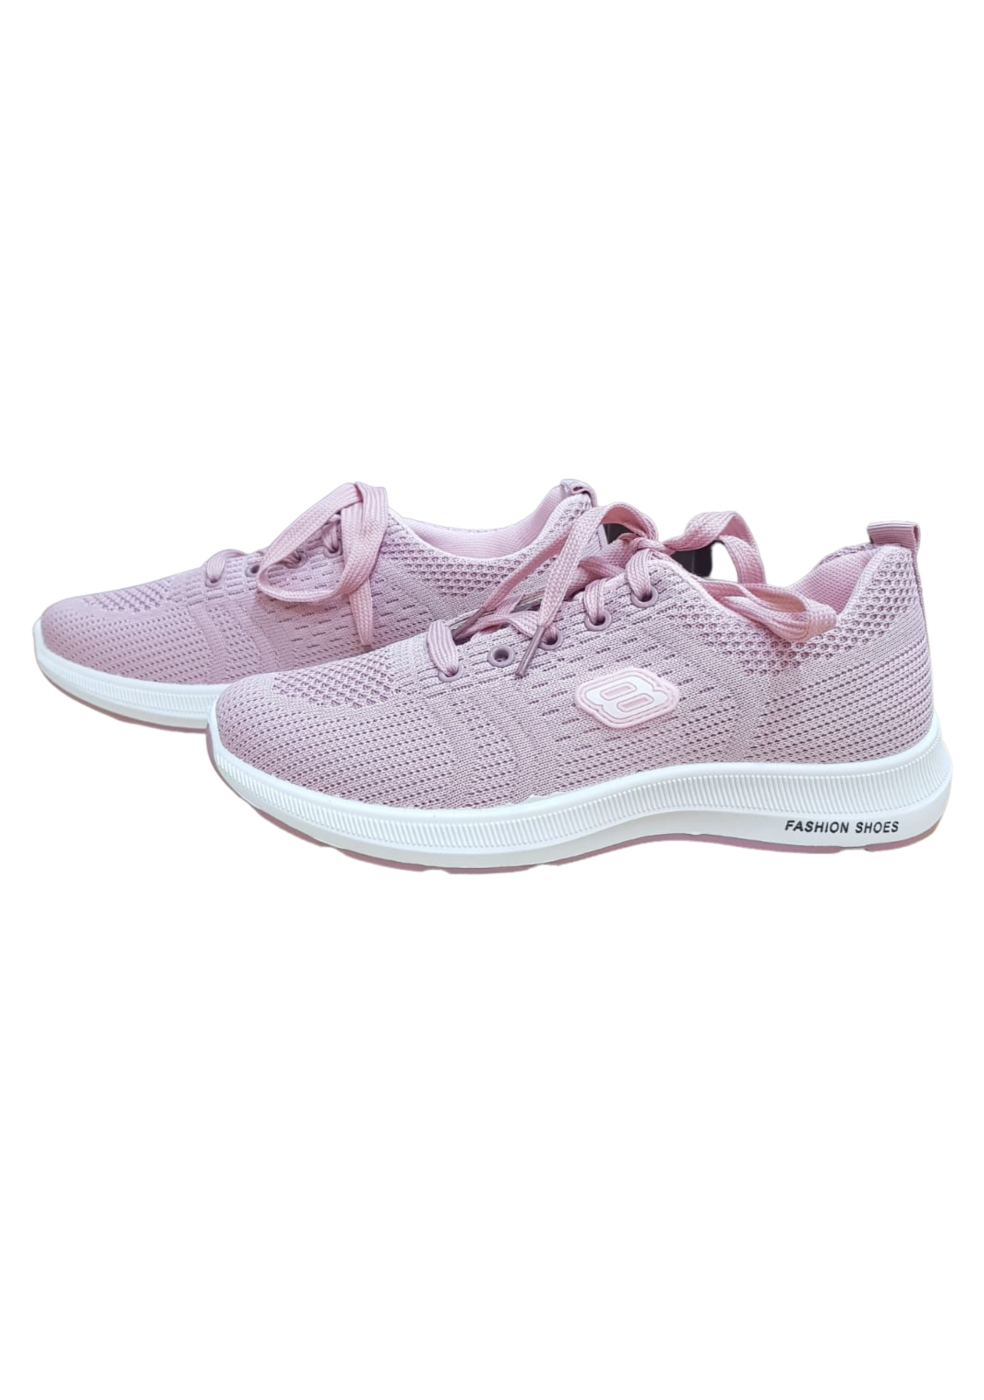 Casual Sneaker Shoes For Women